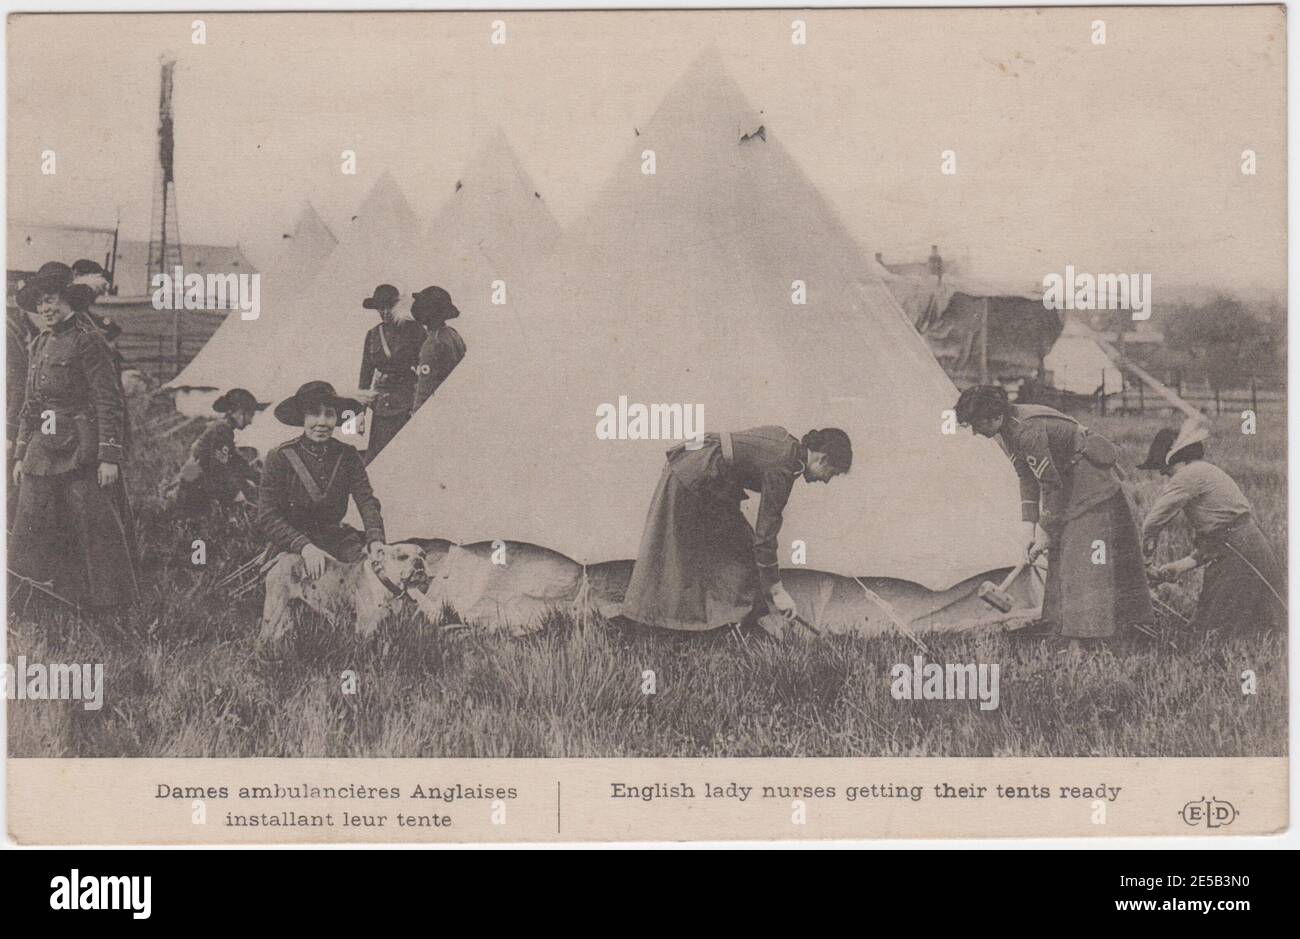 Postcard showing what the caption describes as English lady nurses getting their tents ready. A group of nurses are putting up bell tents in a field. One is wielding a large hammer, another is kneeling with a bull dog. The postcard was published in France during the First World War. Stock Photo